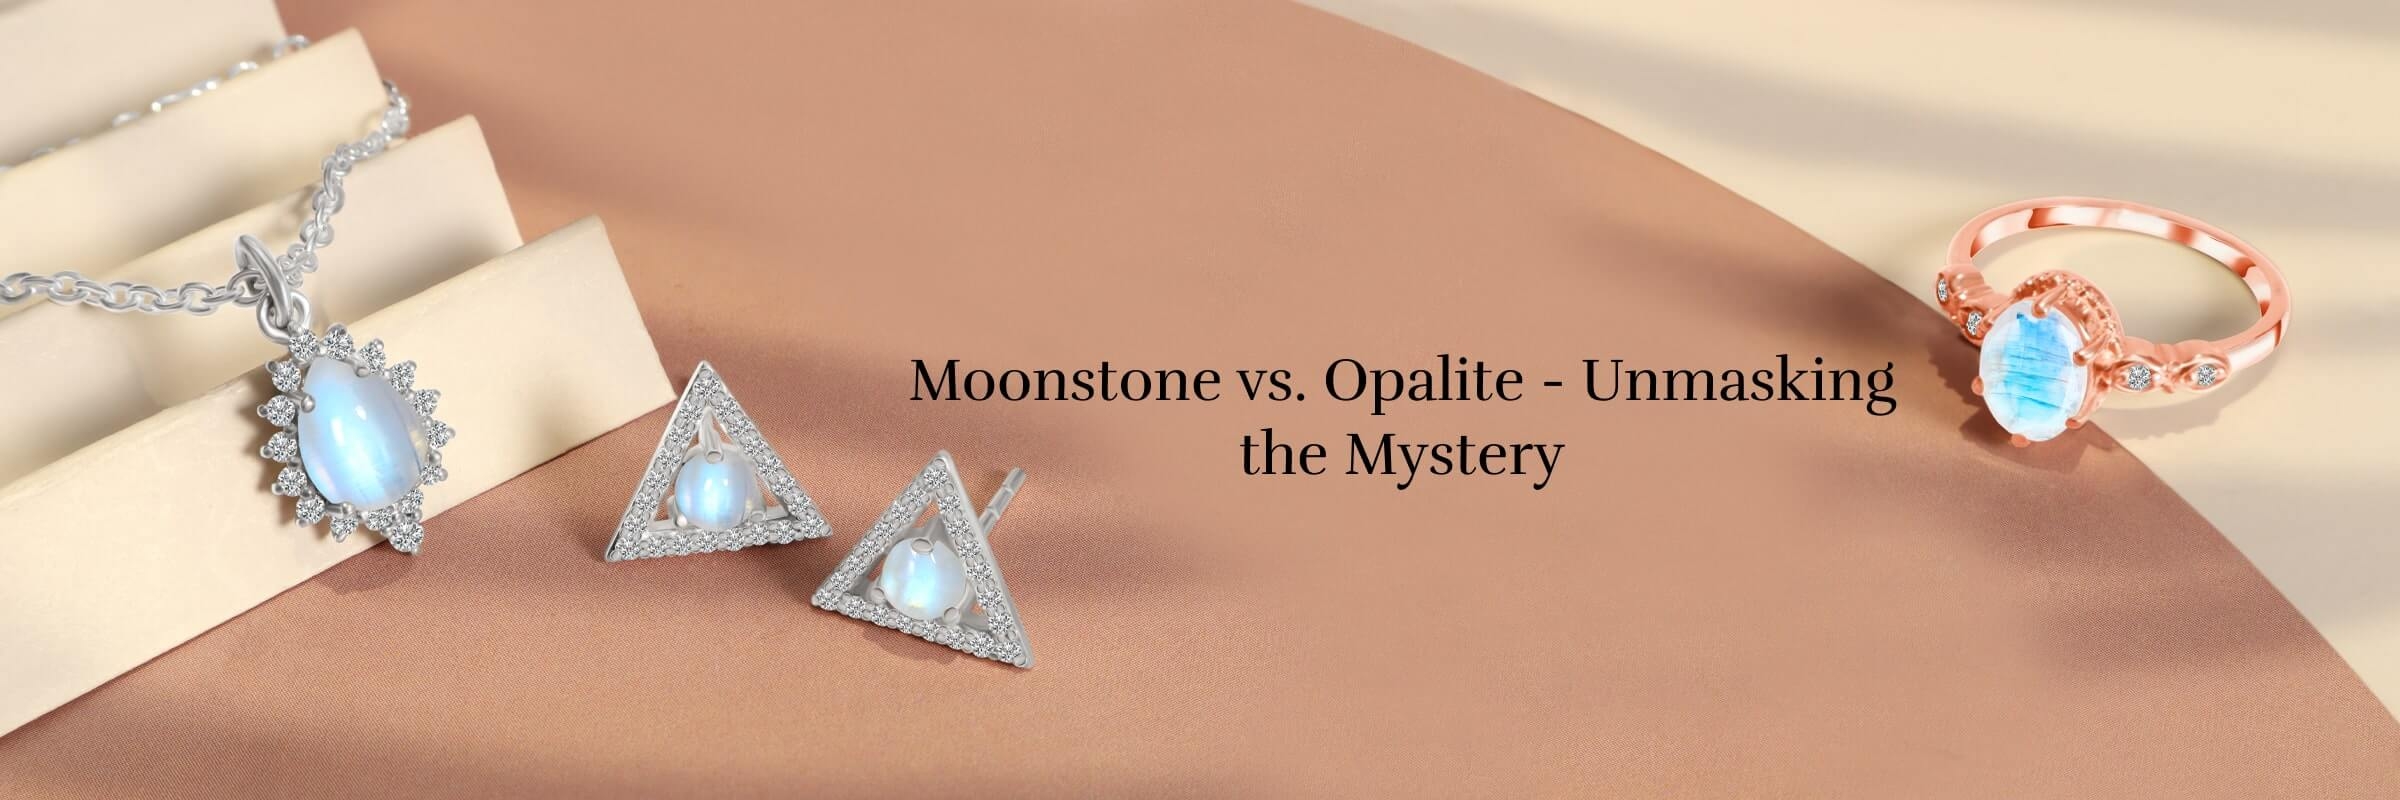 Moonstone Is Confused With Opalite